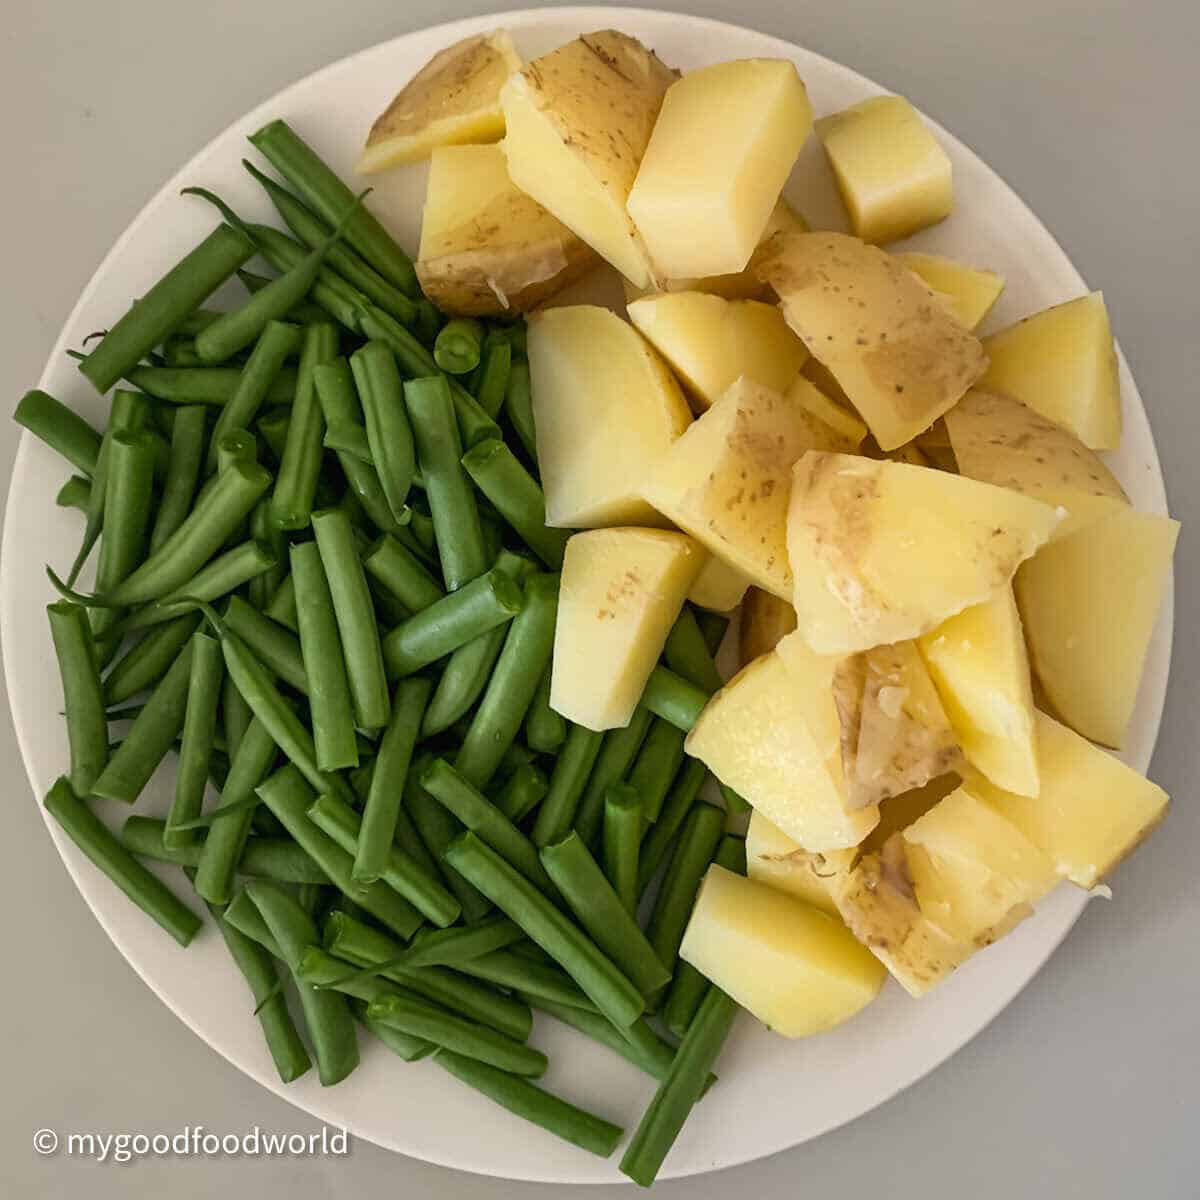 Diced potatoes with their skin and chopped French beans placed on a white round plate.